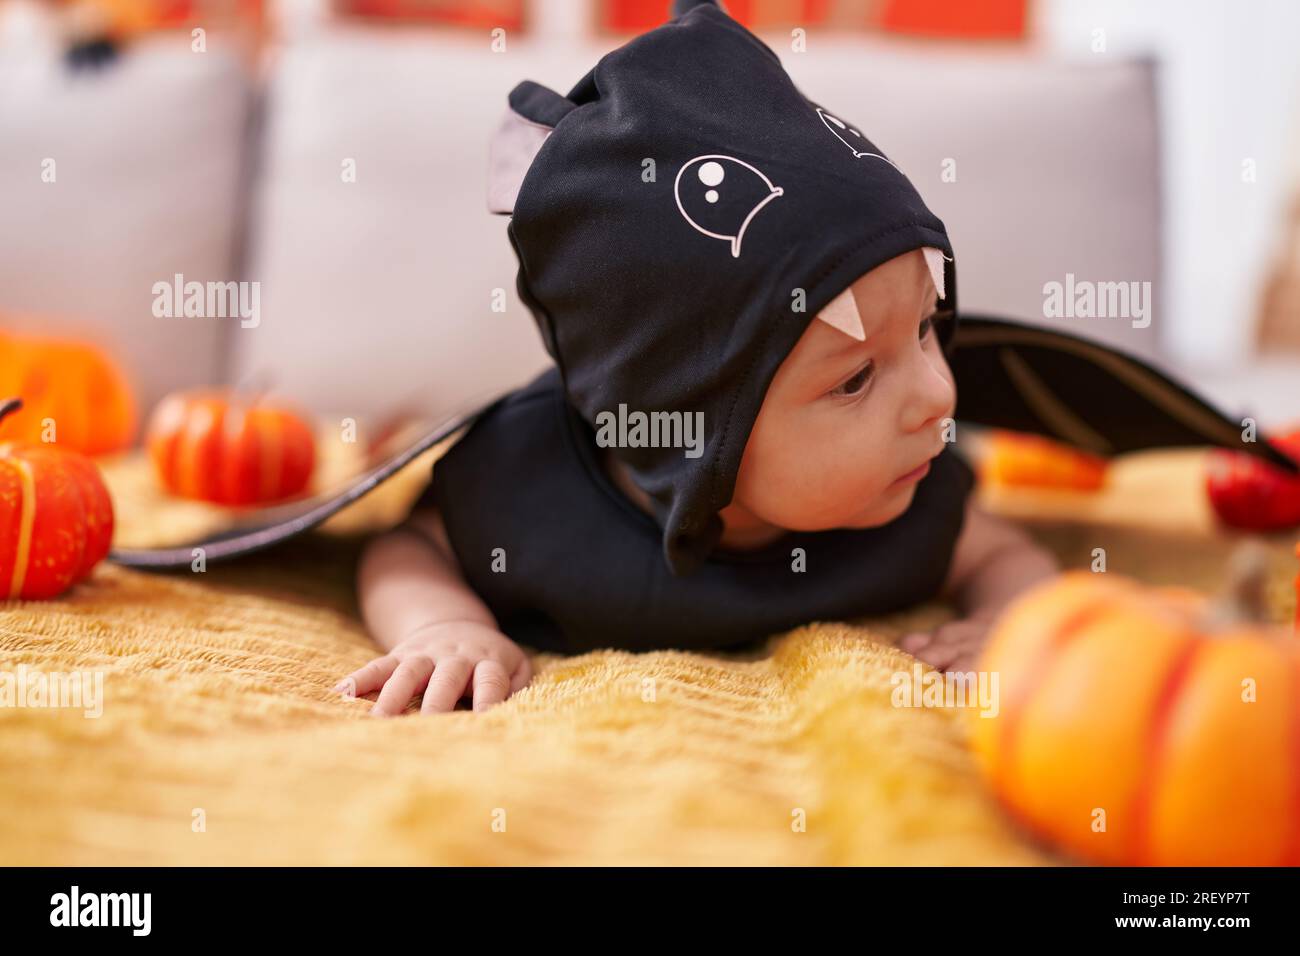 Adorable caucasian baby wearing bat costume lying on sofa at home Stock  Photo - Alamy